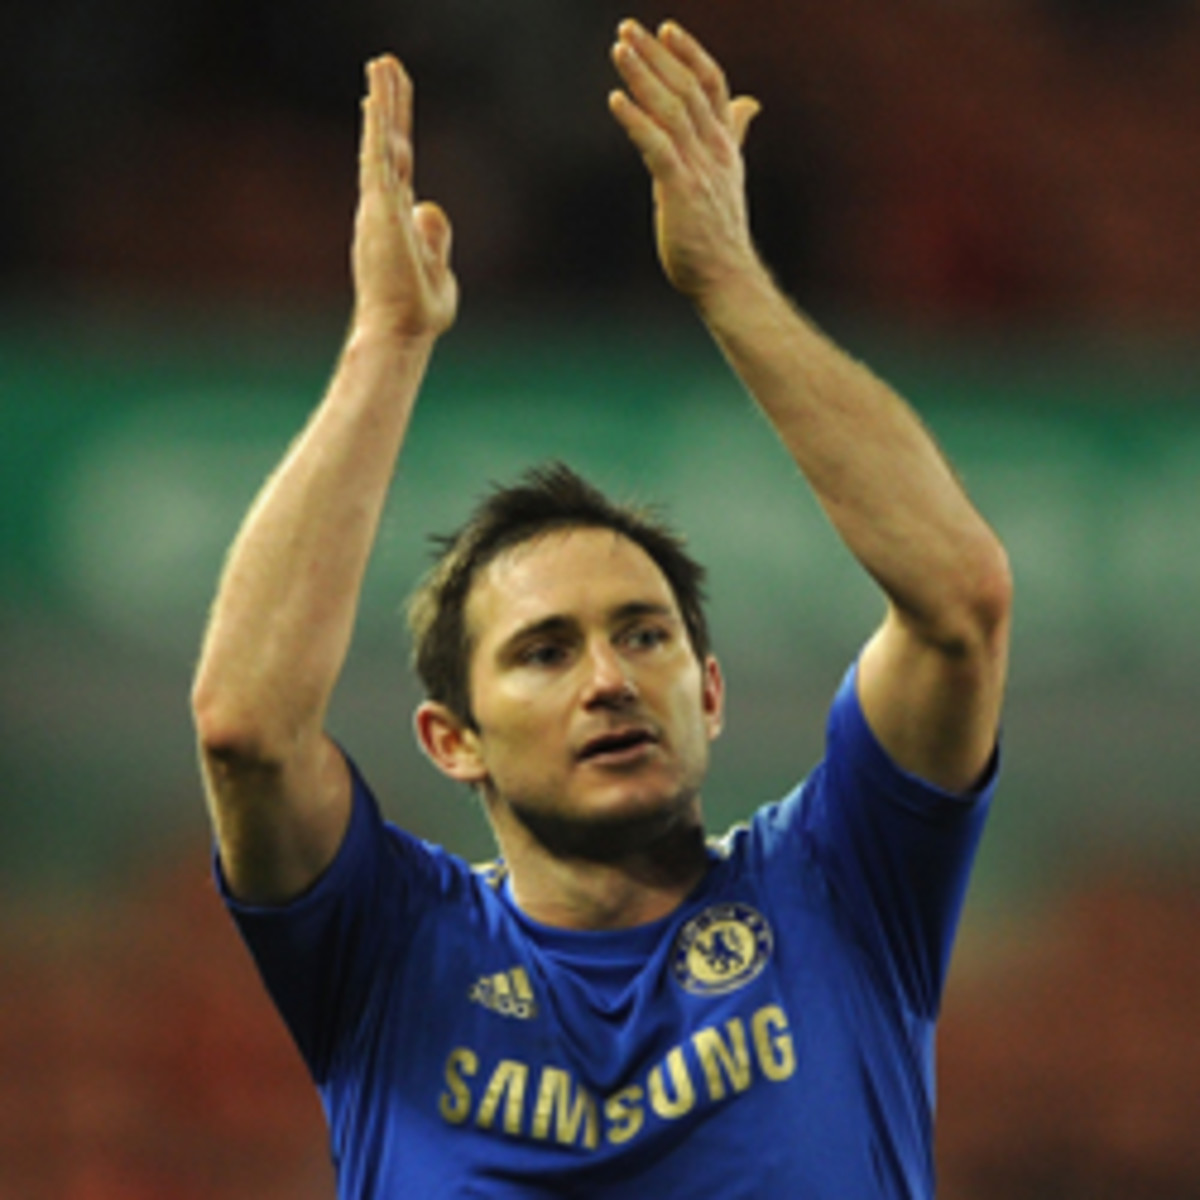 Frank Lampard will replace David Beckham as the LA Galaxy's Designated Player. (Chris Brunskill/Getty Images)